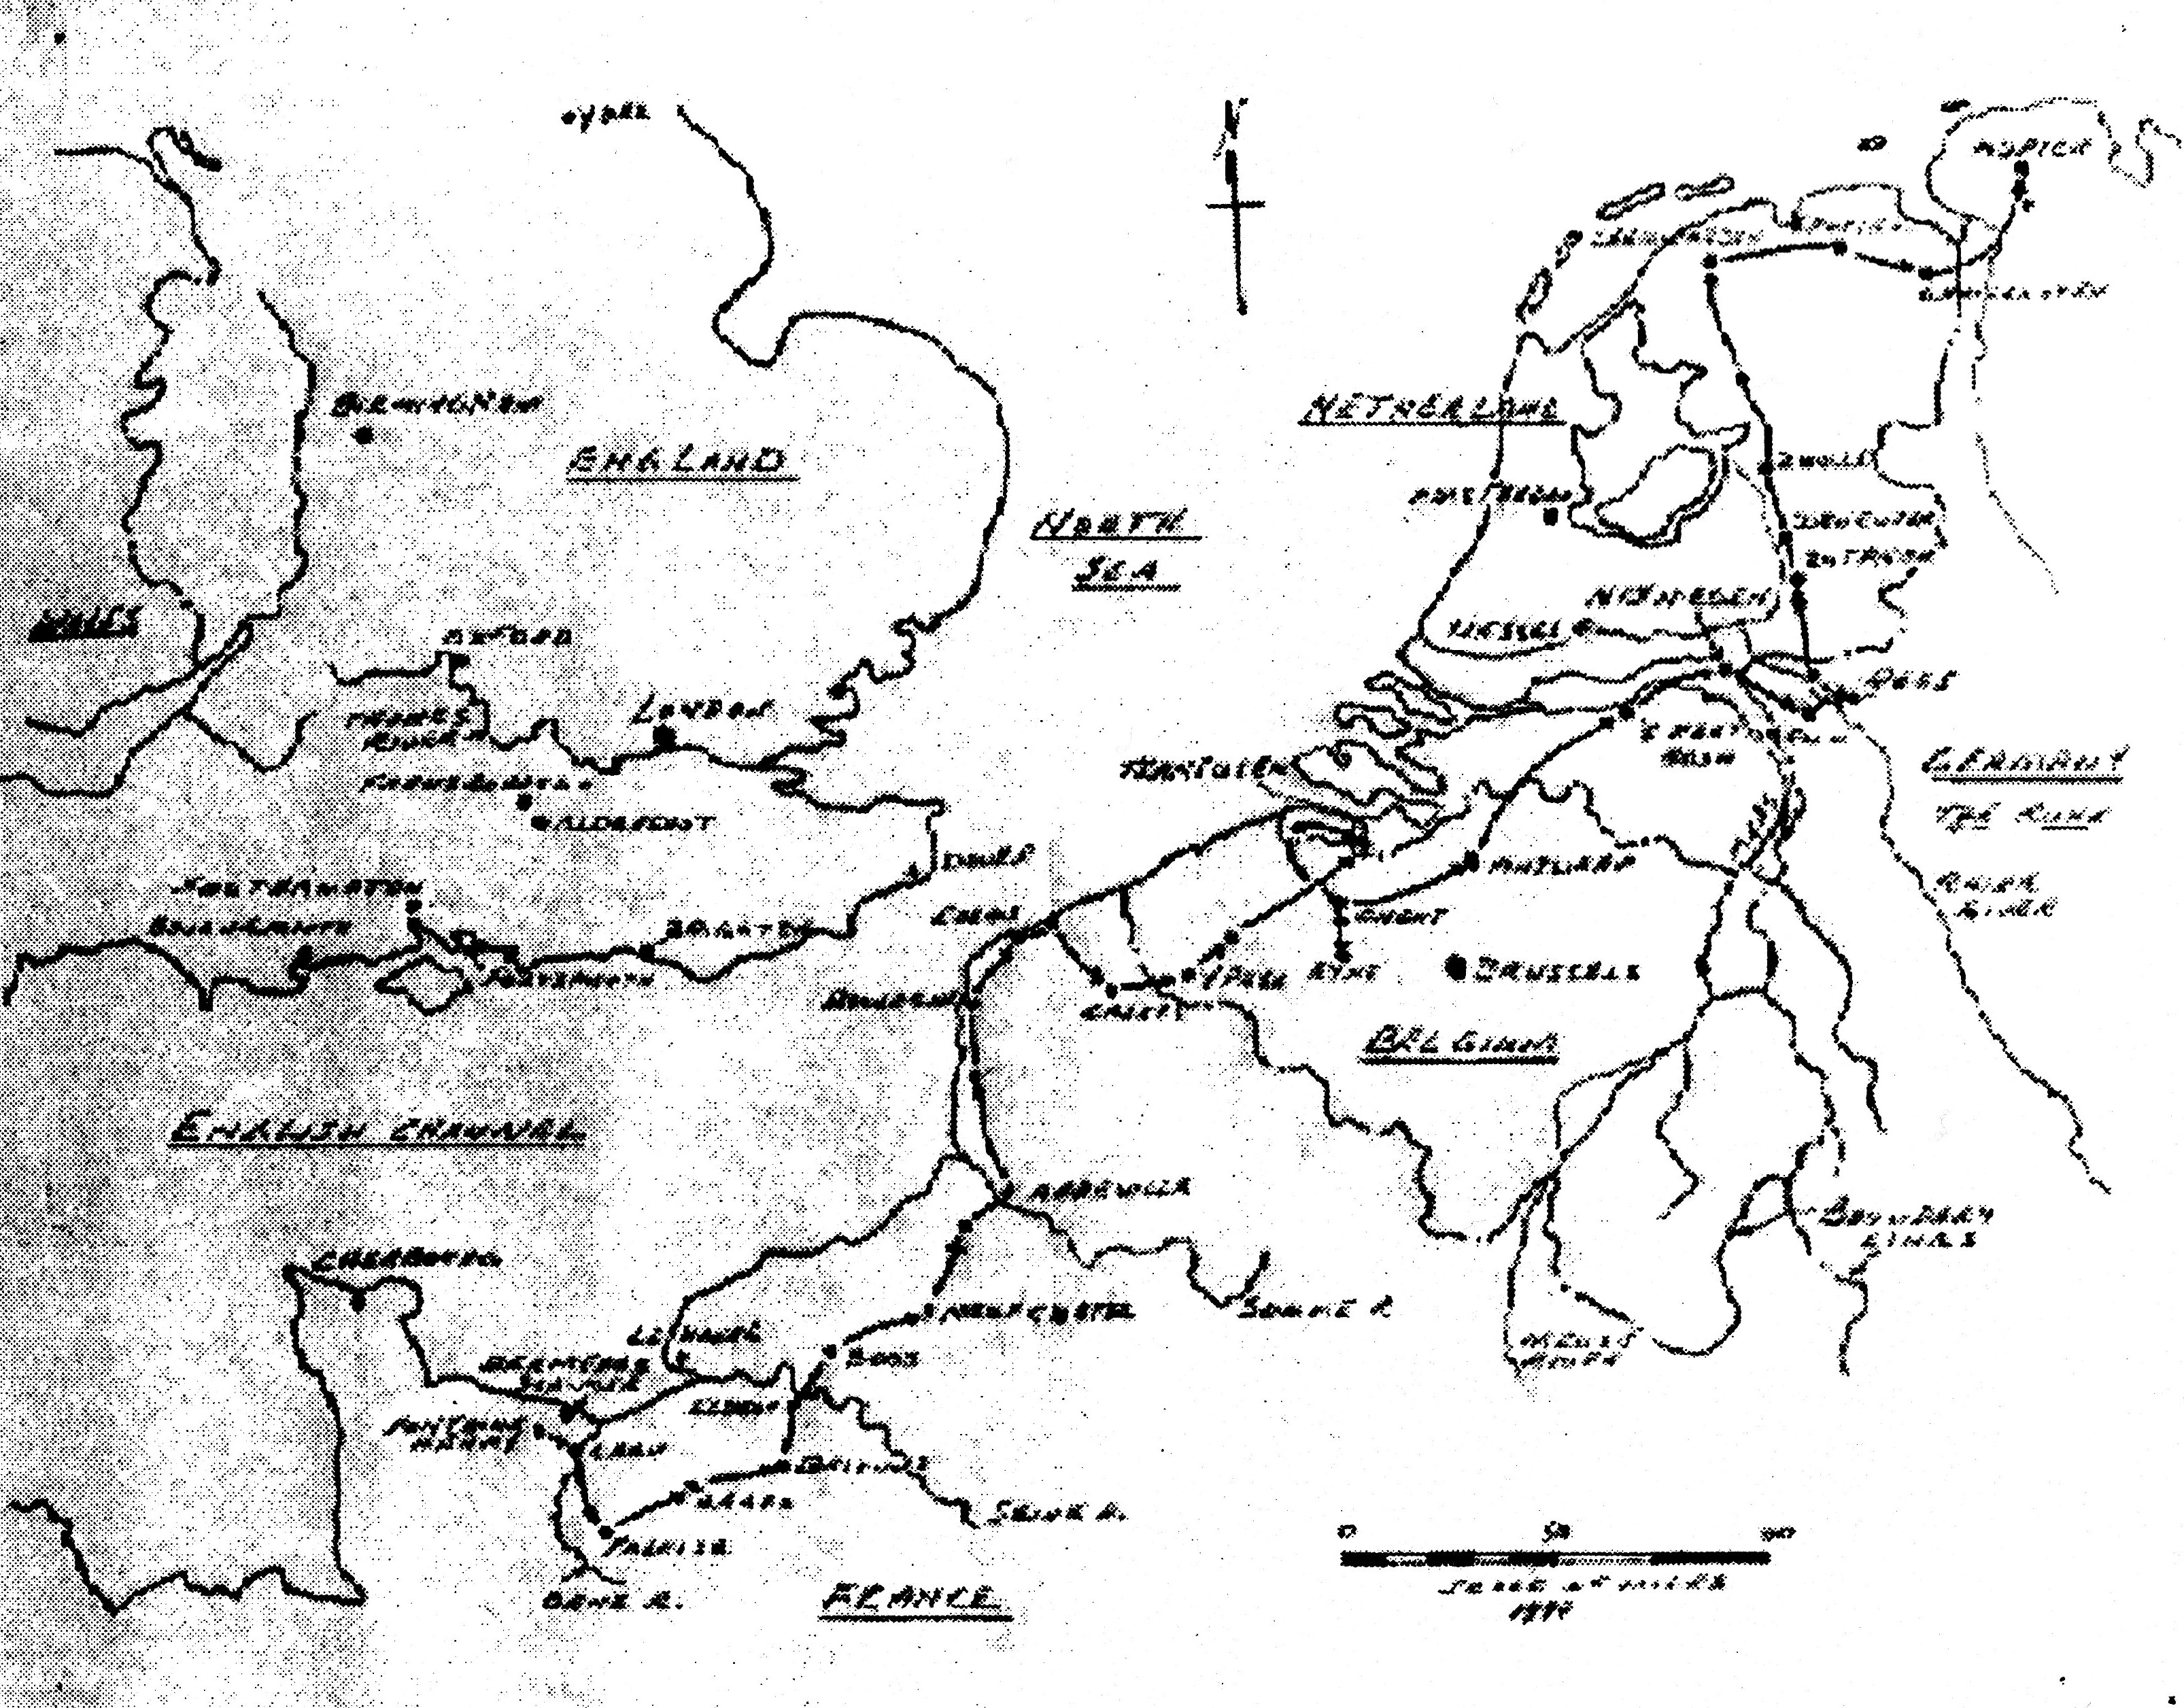 route of the Queen's Own Rifles drawn on a map of Northwest Europe